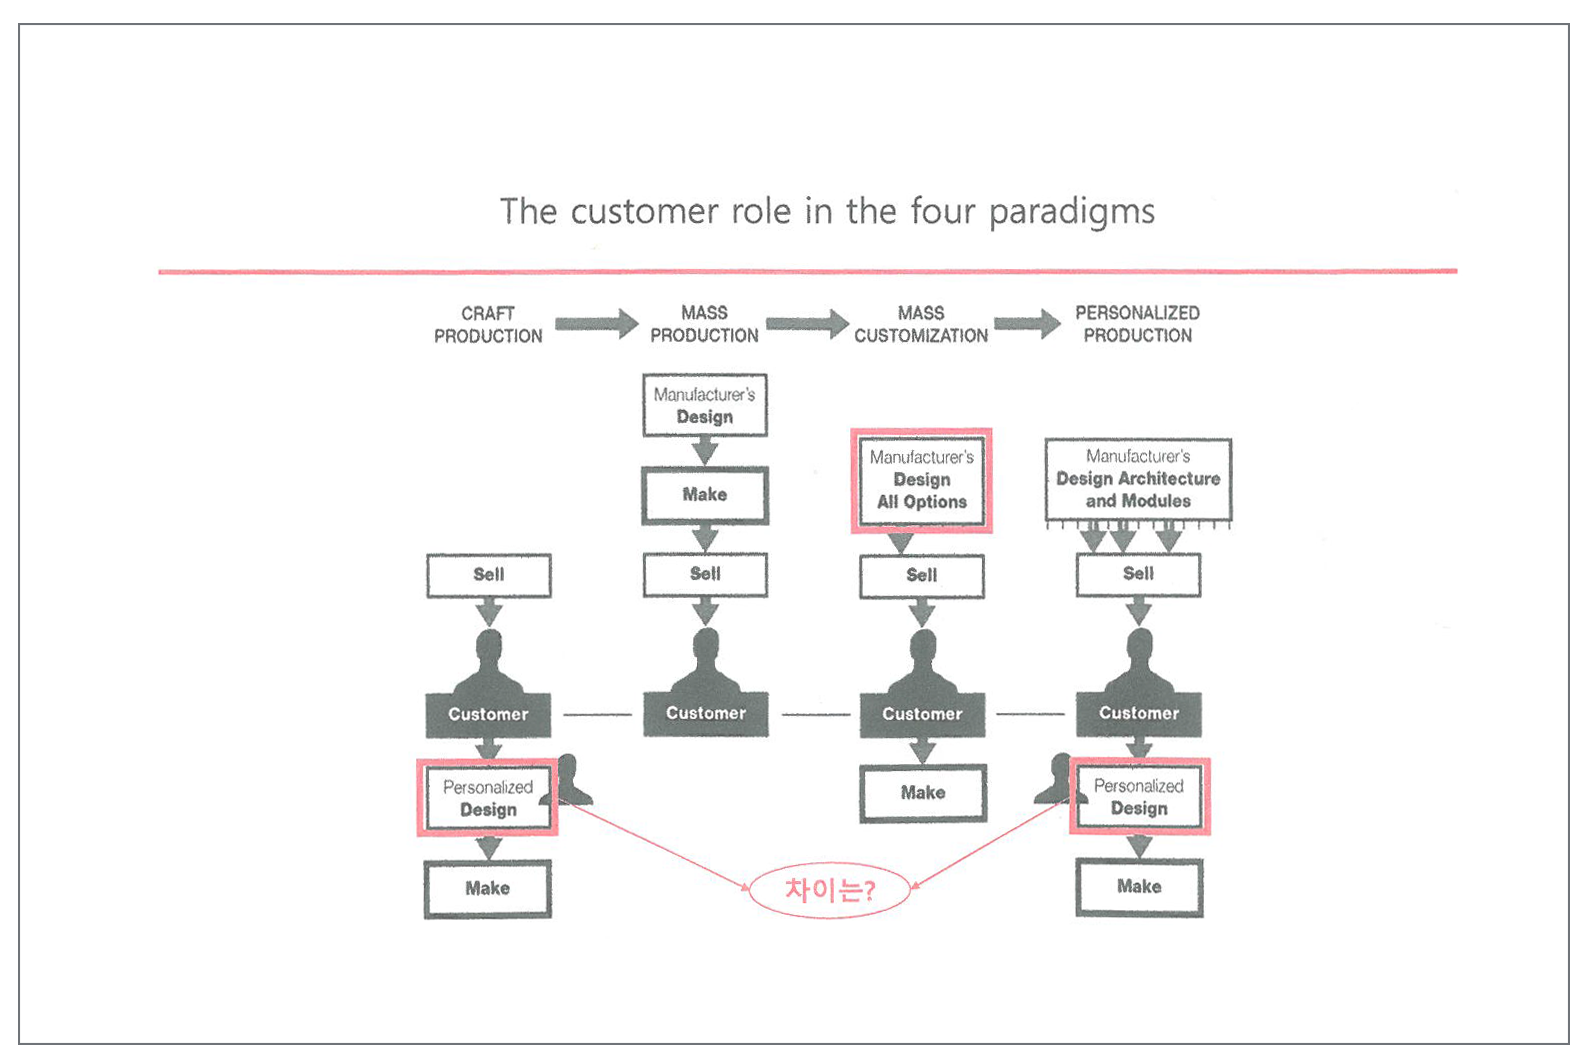 The customer role in the four paradigms